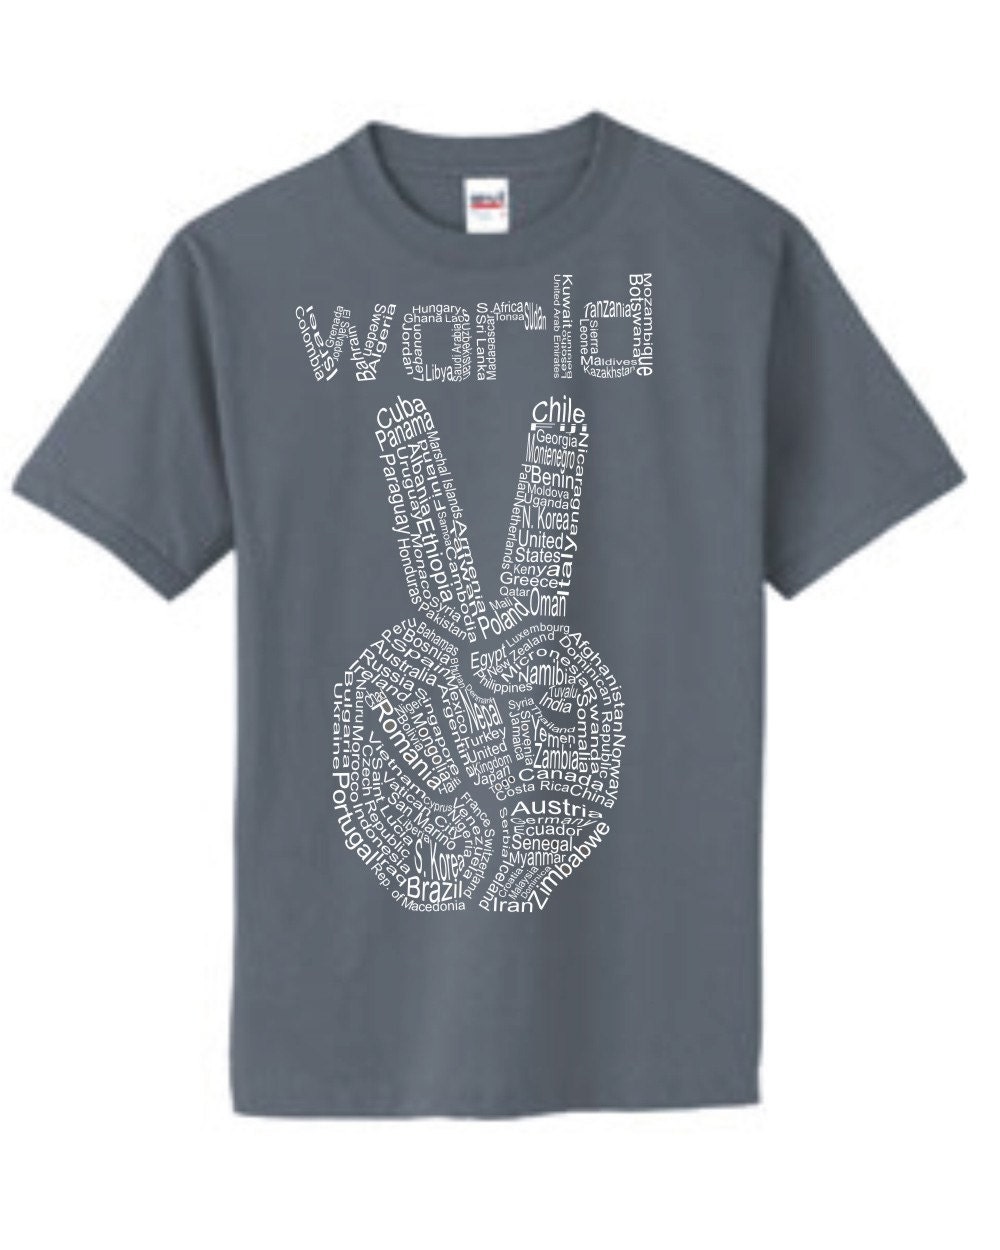 Japan Relief - World Peace on Youth, Organic Cotton tshirt